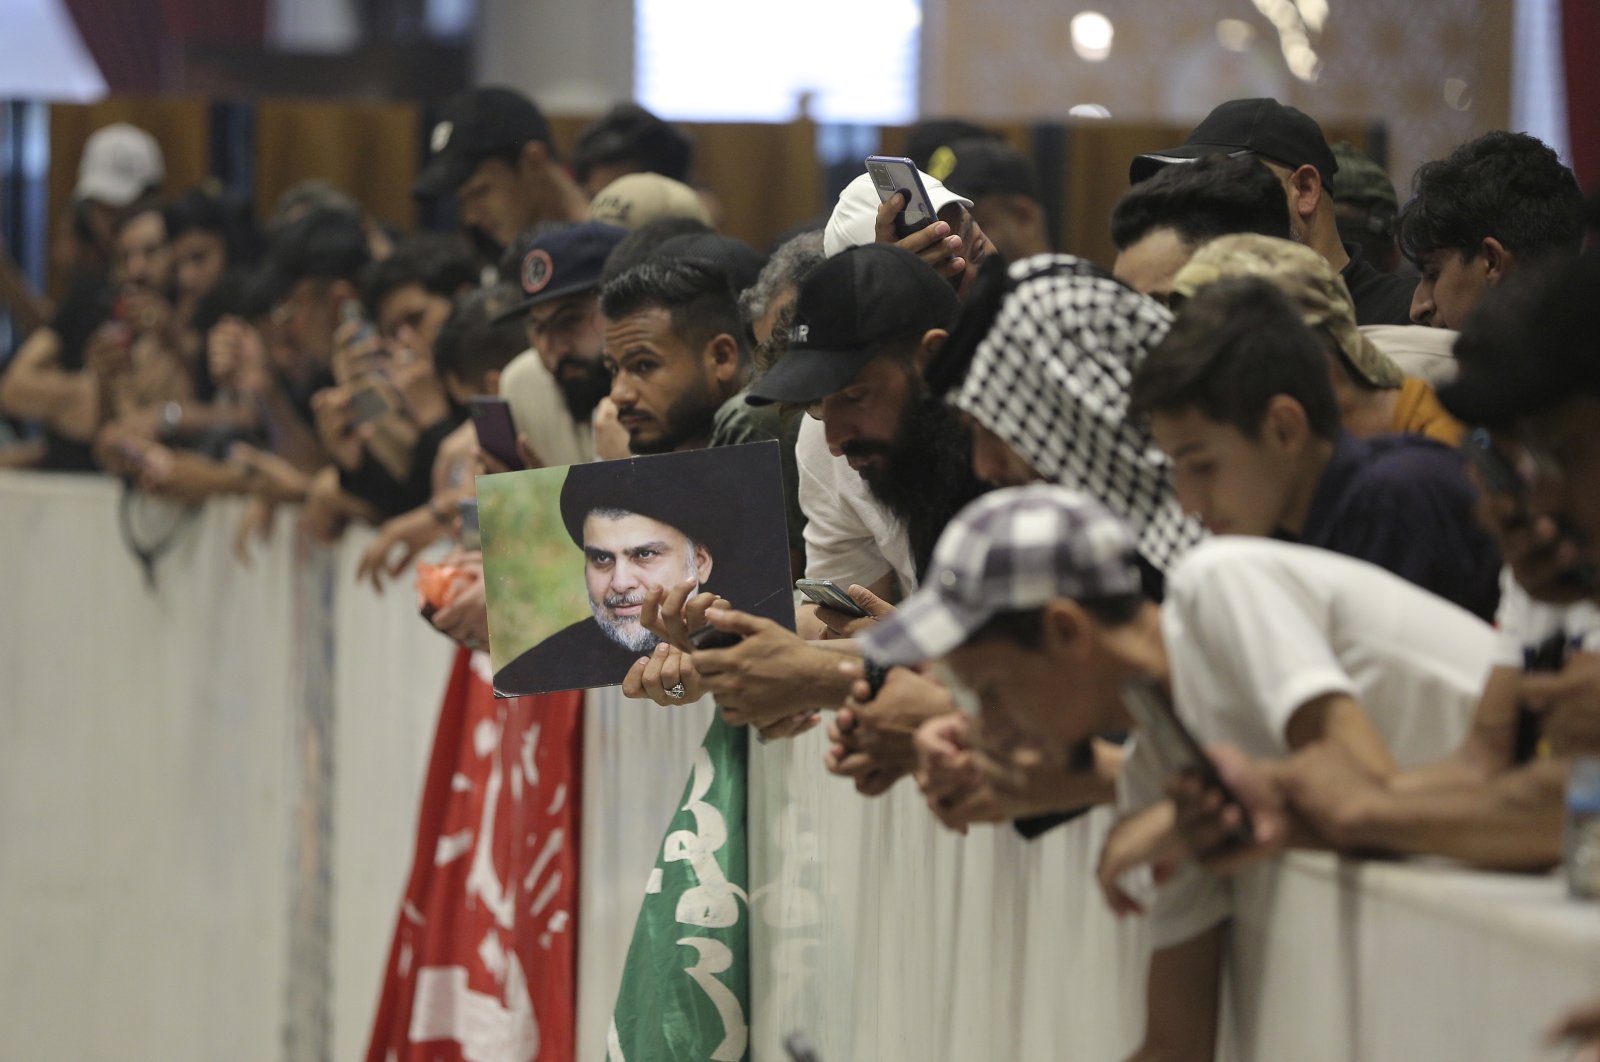 Followers of Shiite cleric Muqtada al-Sadr hold posters with his photo during a sit-in, inside the parliament in Baghdad, Iraq, Aug. 1, 2022. (AP Photo)